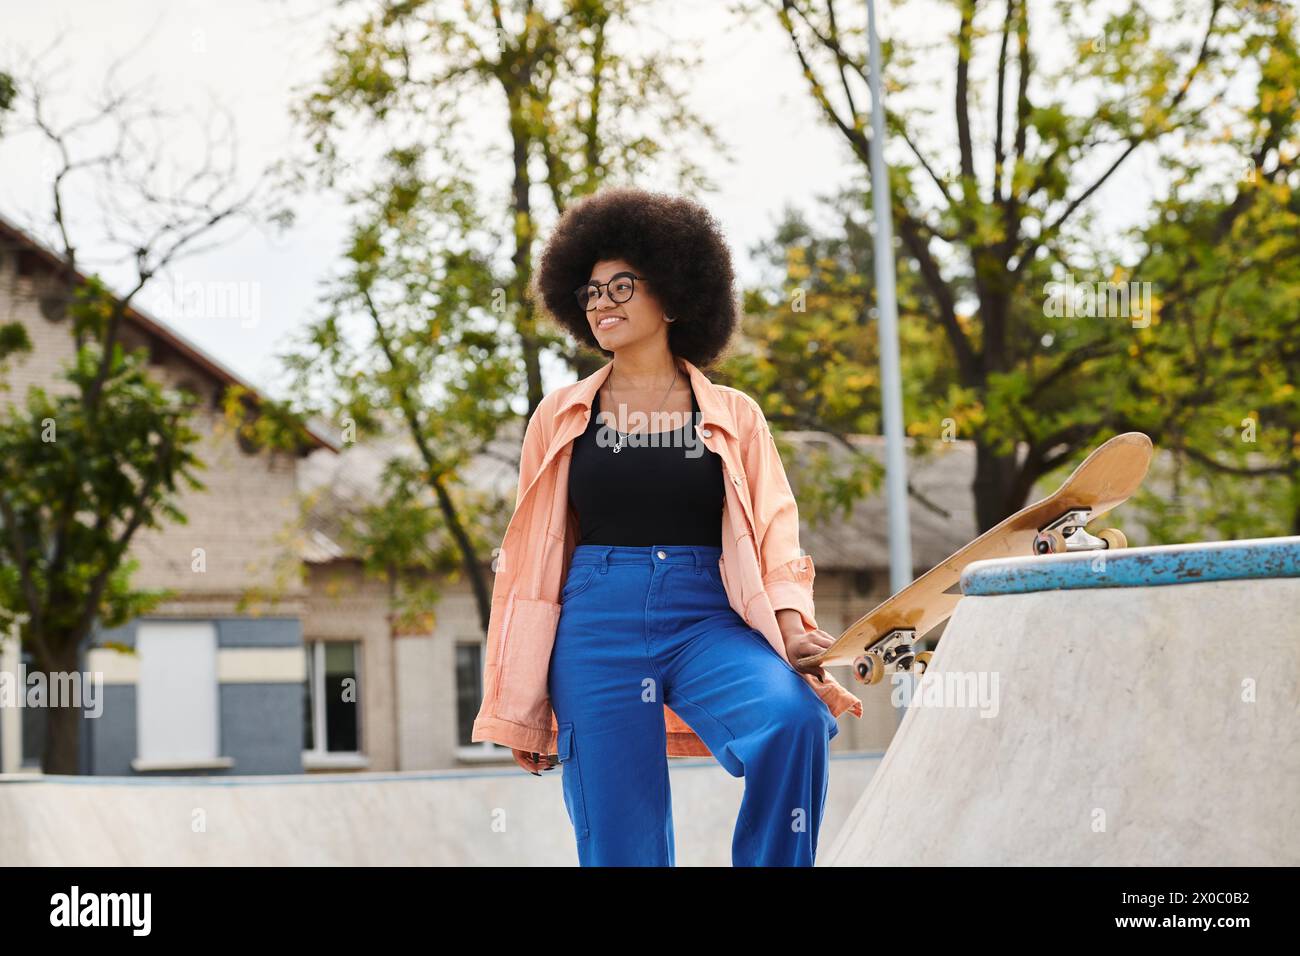 Young African American woman with curly hair stands next to skateboard on a skateboard ramp in a vibrant outdoor skate park. Stock Photo